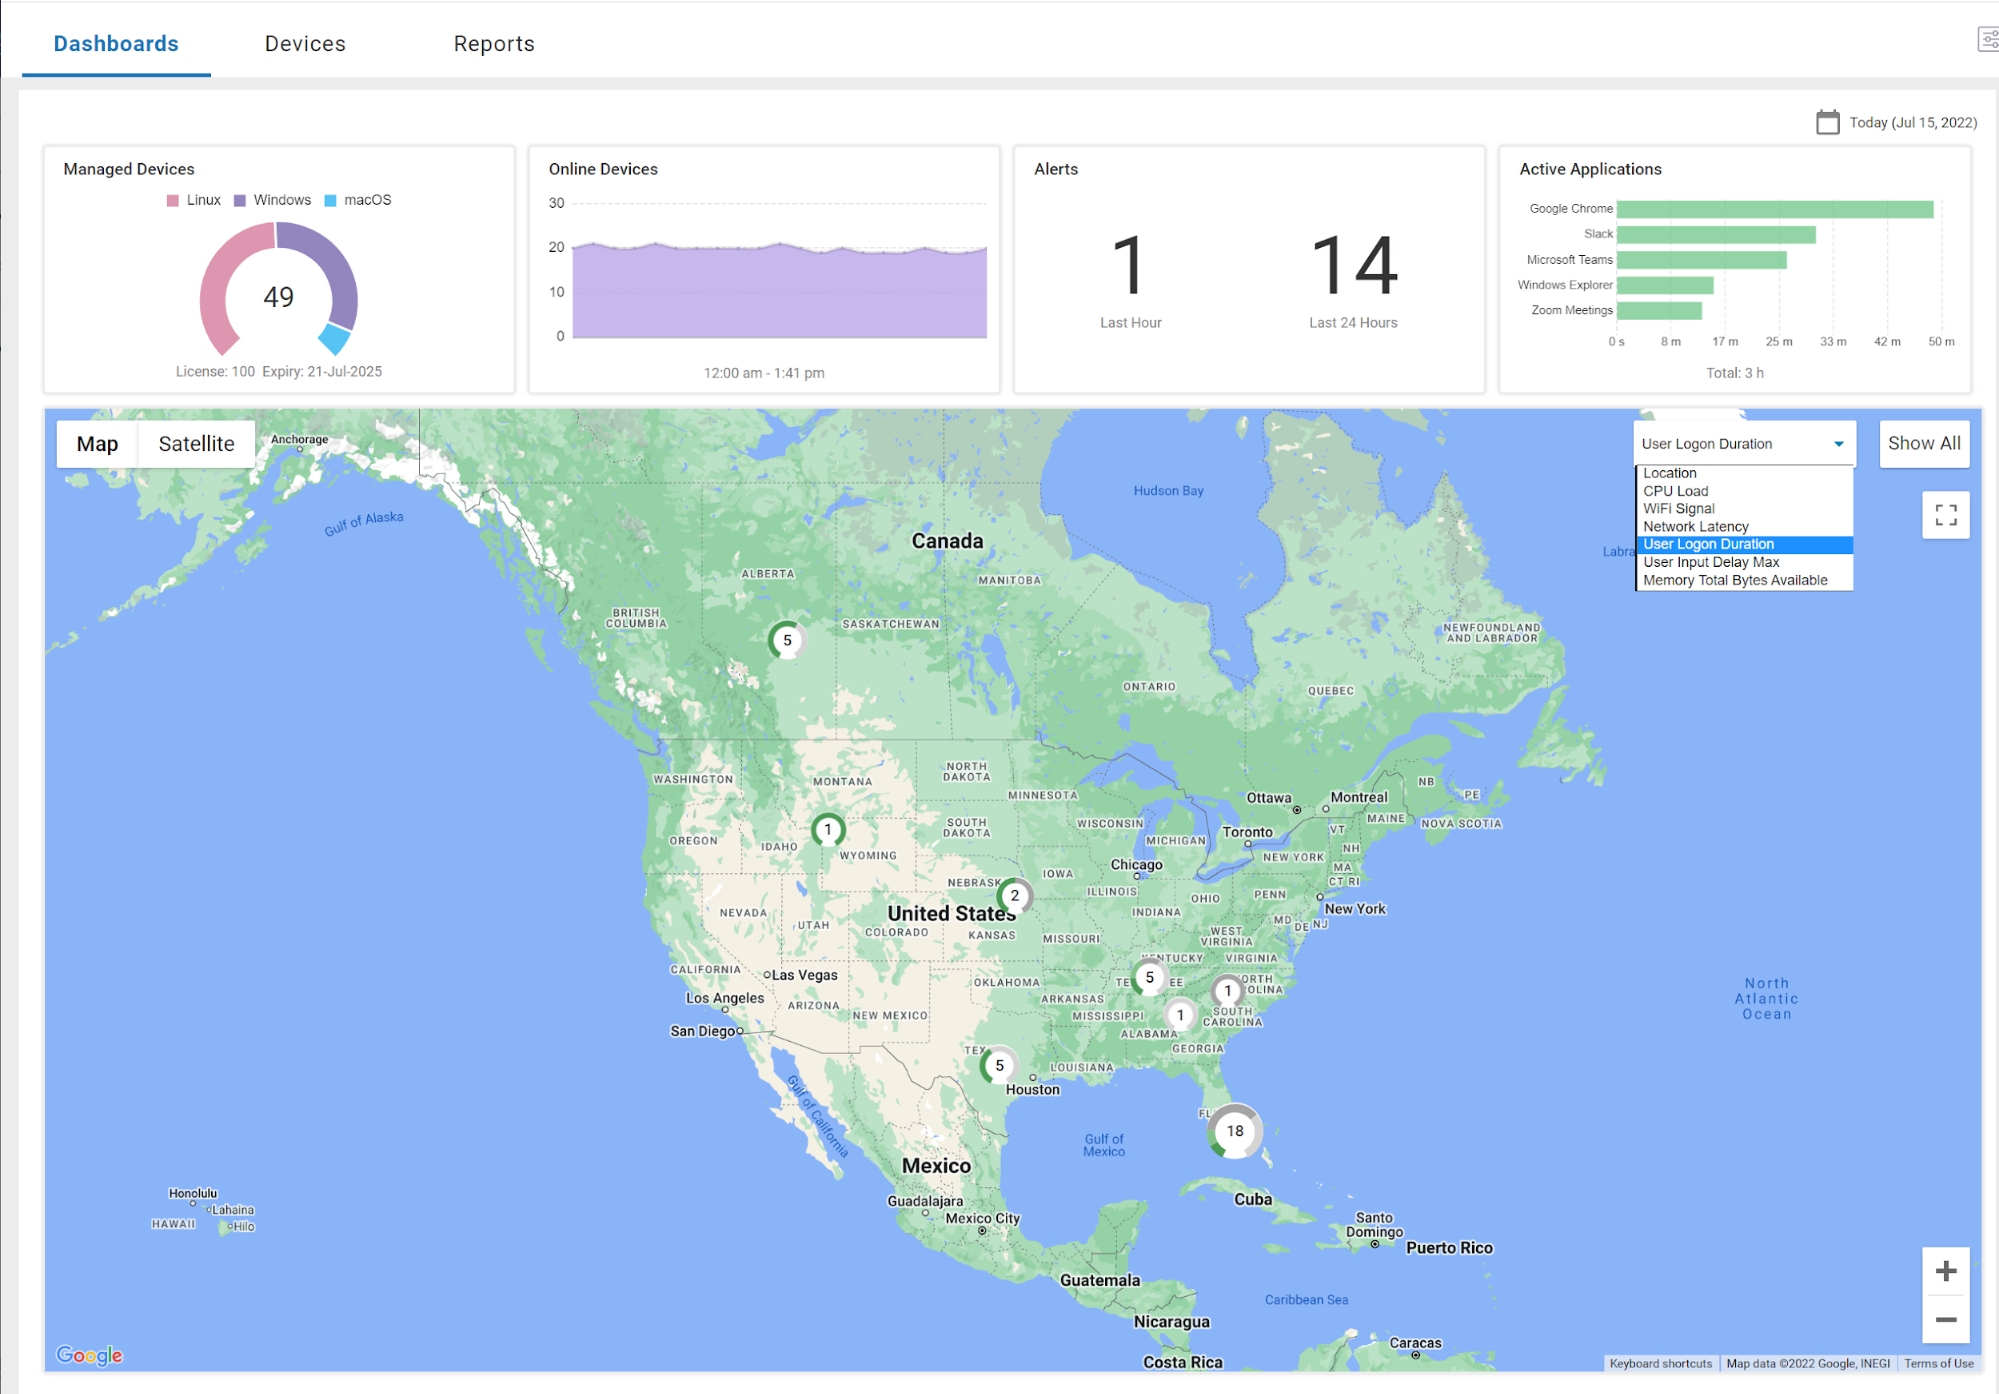 Users with slow logon times can be identified from the main dashboard by selecting User Logon Duration from the drop-down menu on the map widget.